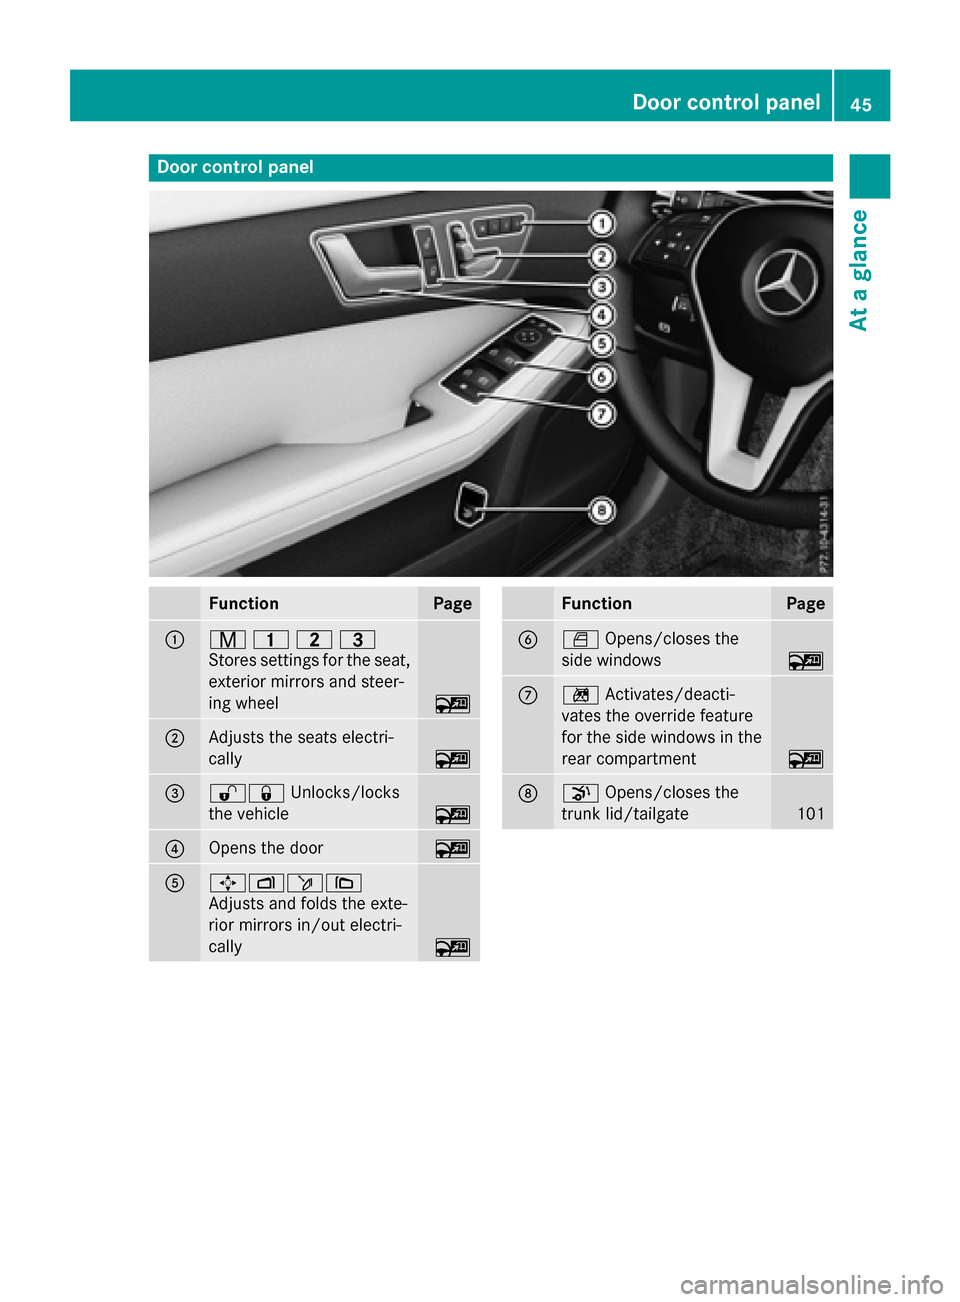 MERCEDES-BENZ E-Class SEDAN 2016 W213 Owners Manual Door controlpanel
FunctionPage
:r 45=
Stores settings for the seat,
exterior mirrors and steer-
ing wheel
~
;Adjusts the seats electri-
cally
~
=%& Unlocks/locks
the vehicle
~
?Opens the door~
A7Zö\
